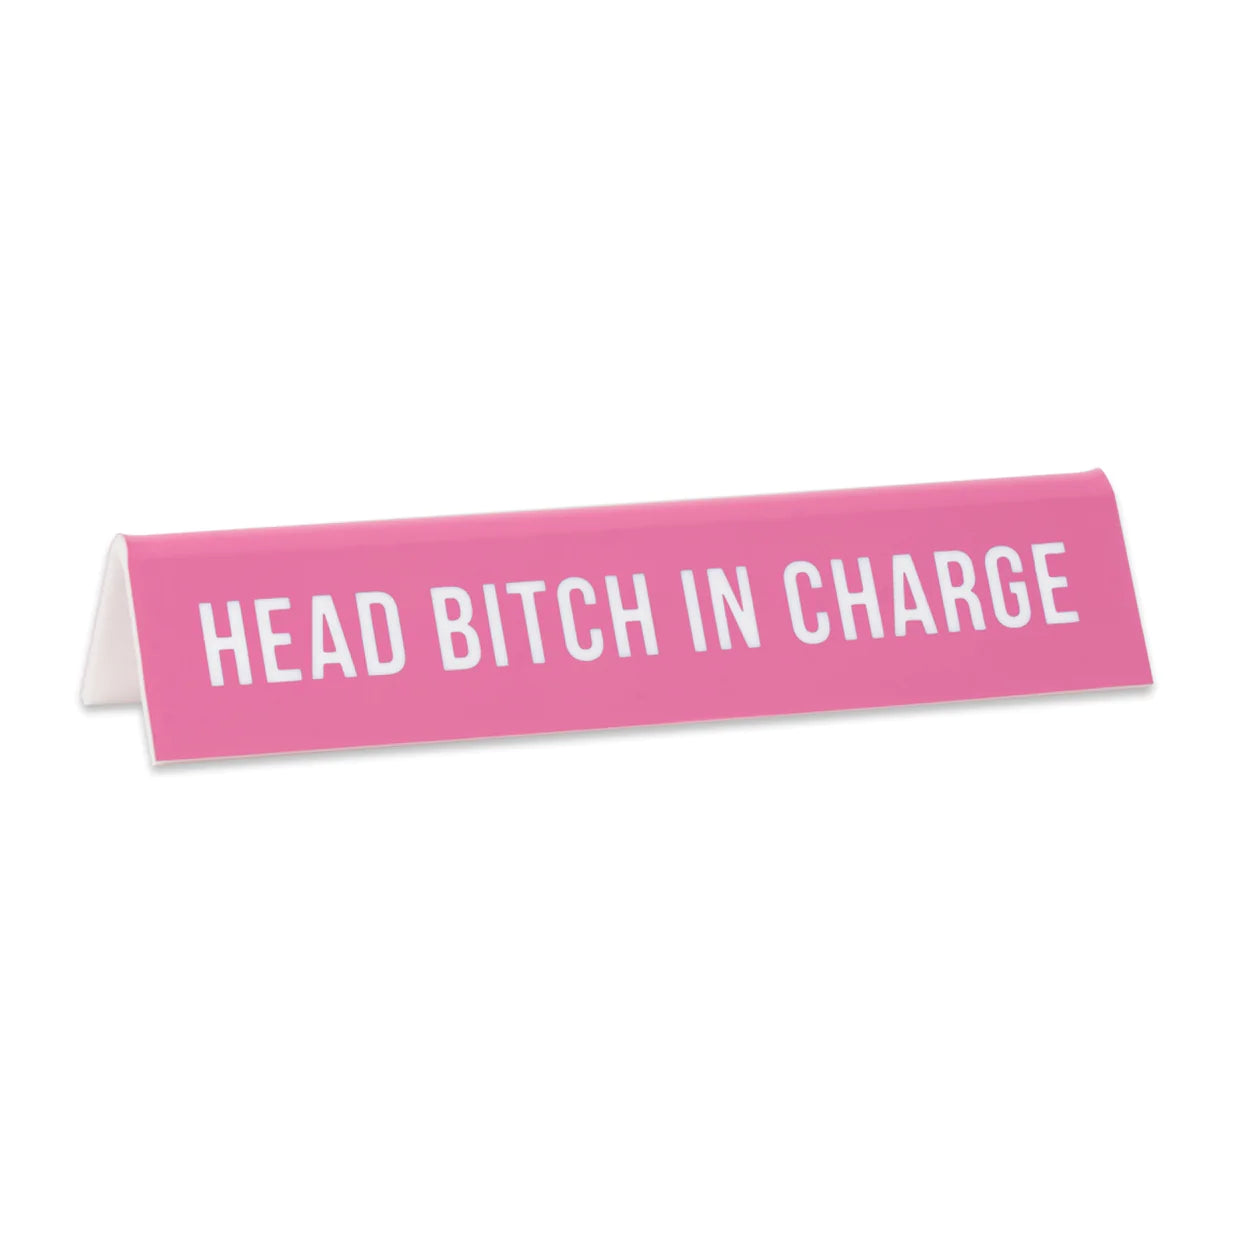 HEAD BITCH IN CHARGE OFFICE SIGN